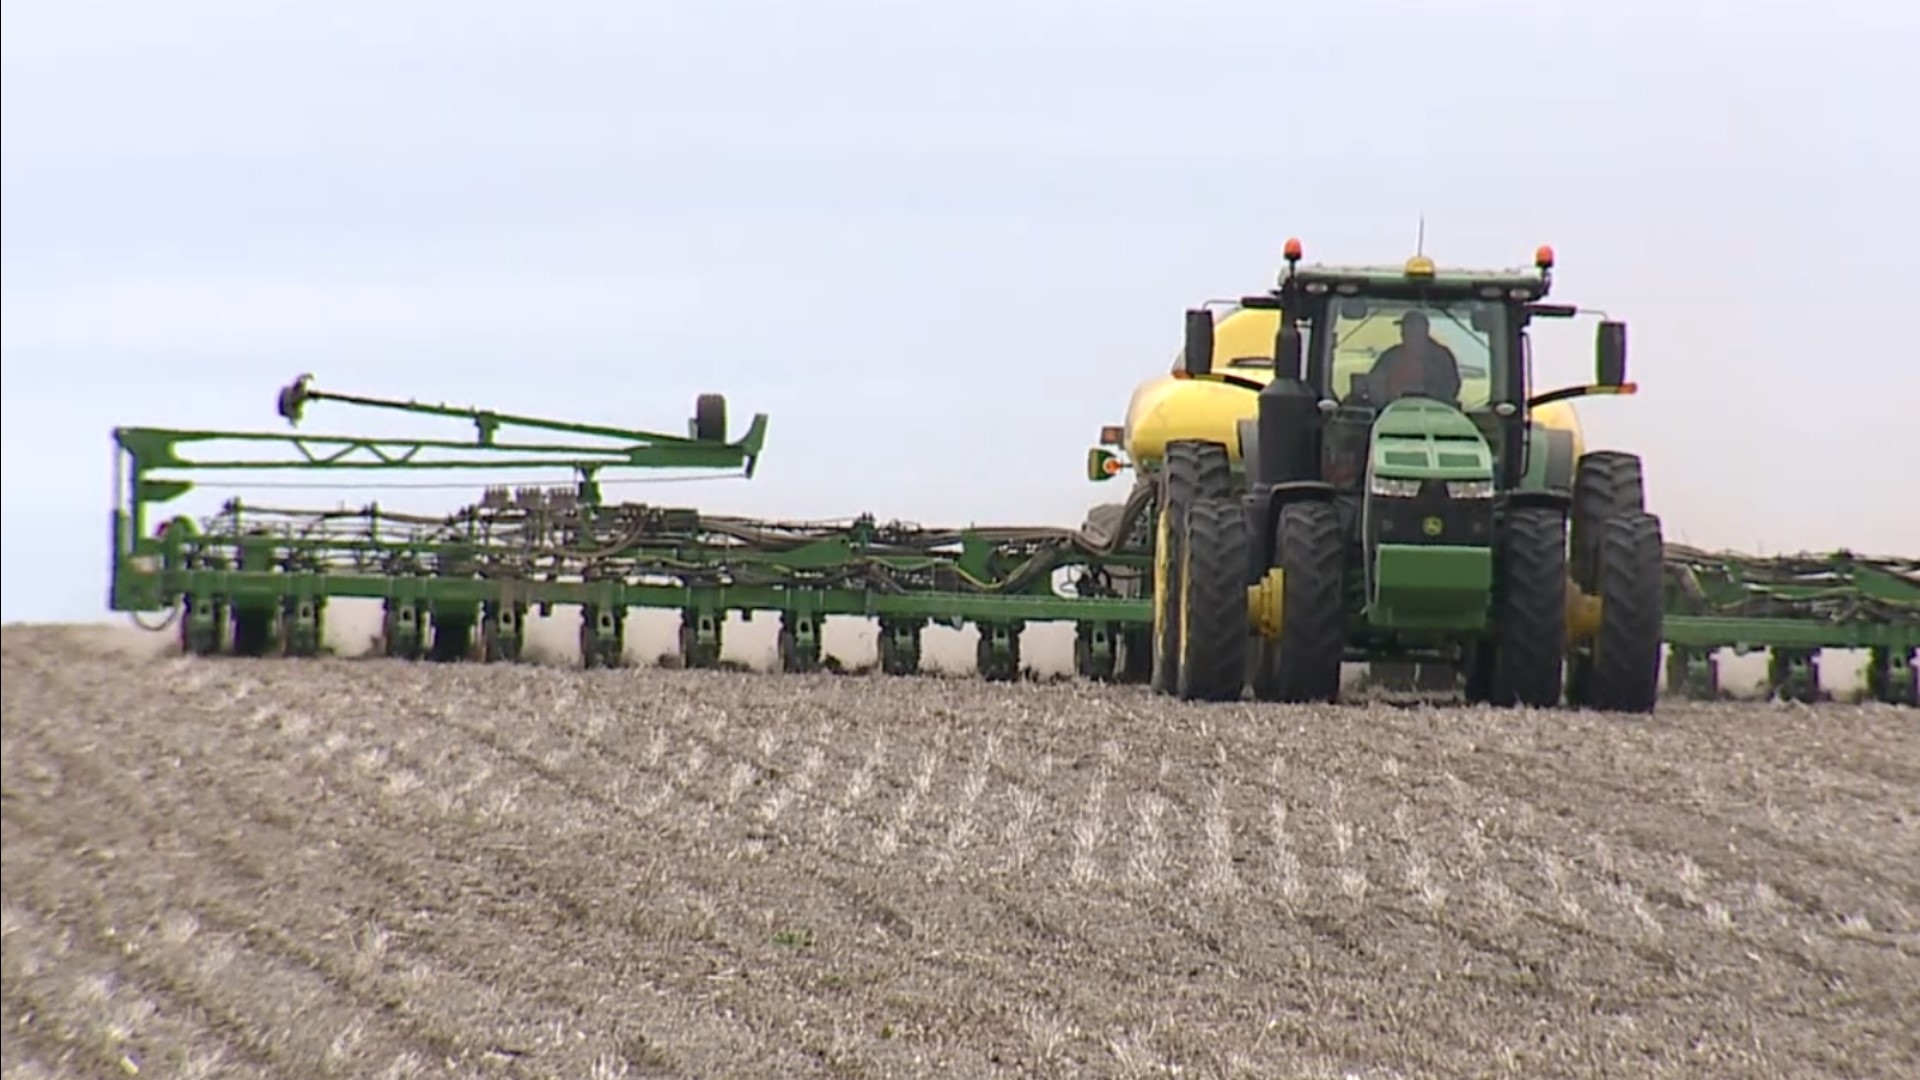 One Iowa farmer saw his nitrogen prices double, while phosphorous and potash prices increased by roughly 23%, resulting in more than $100,000 in increased costs.